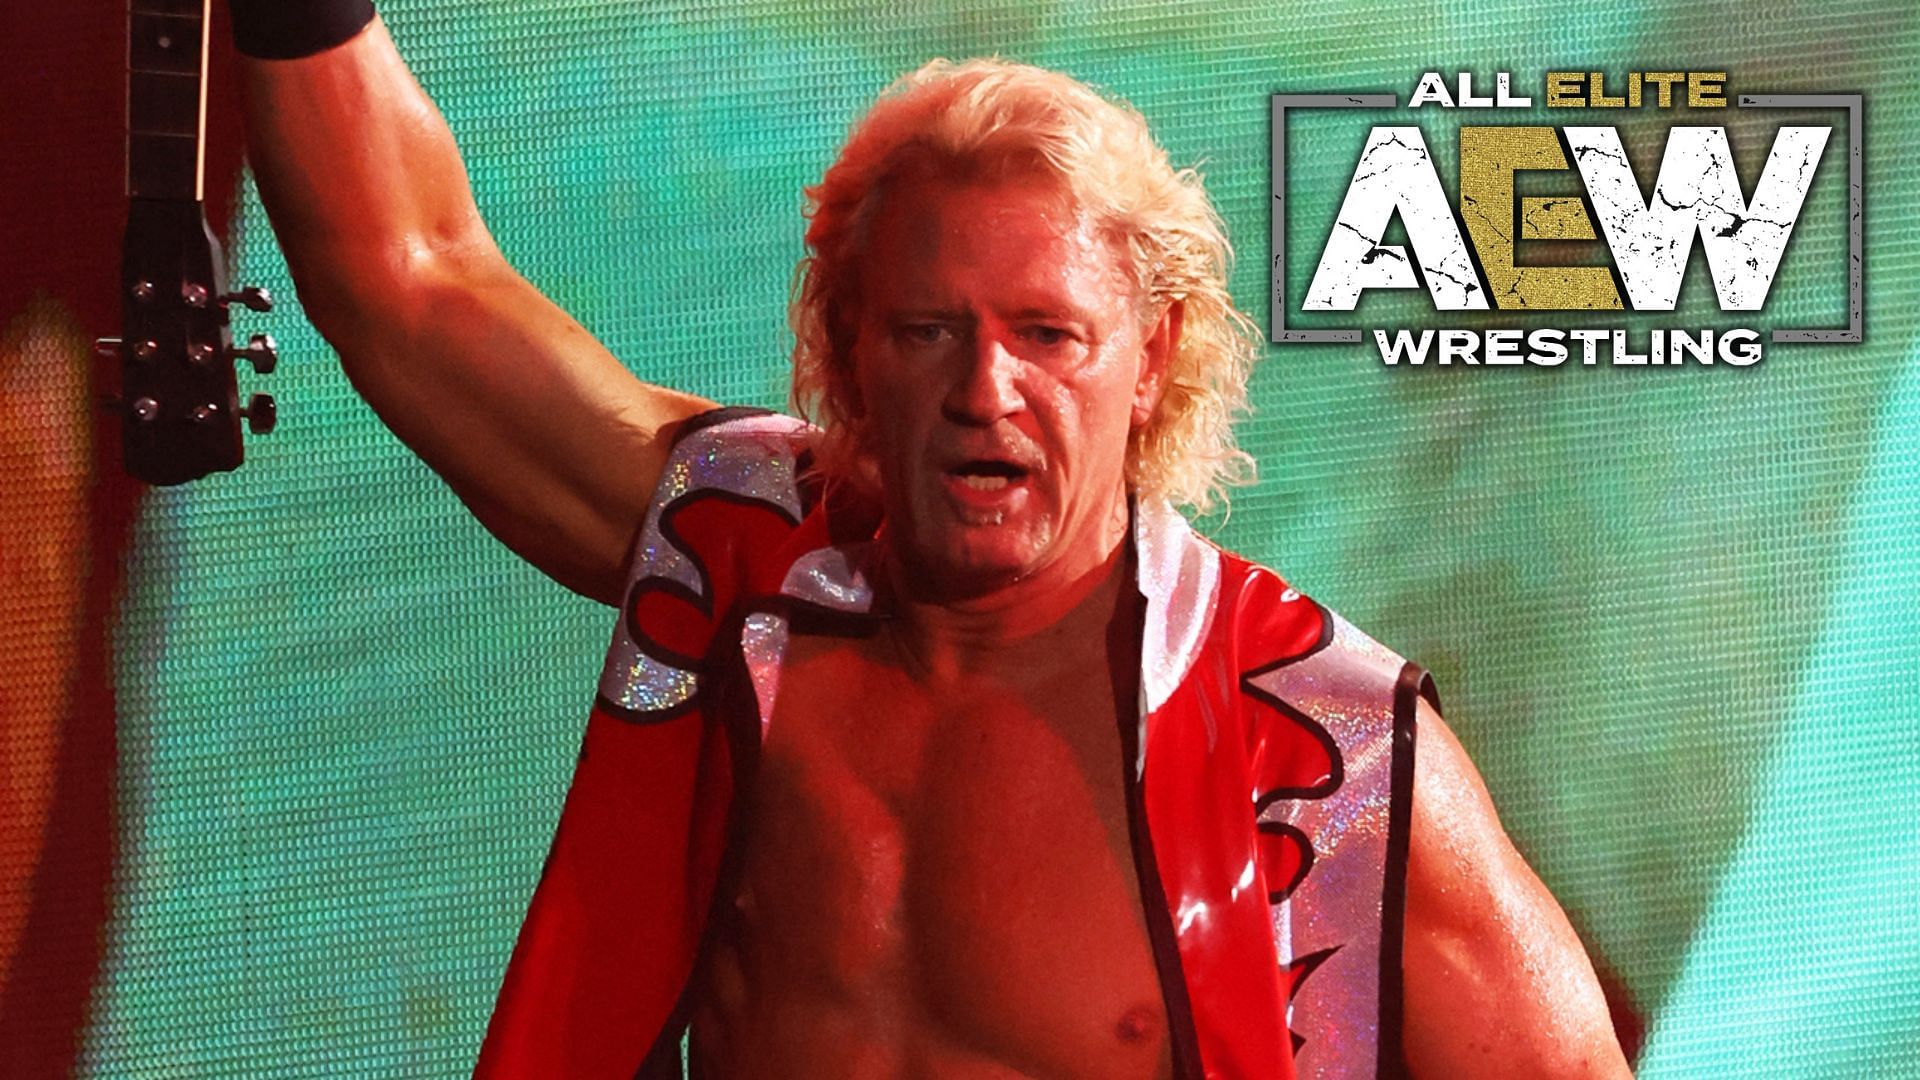 Jeff Jarrett recently had a match against the Acclaimed